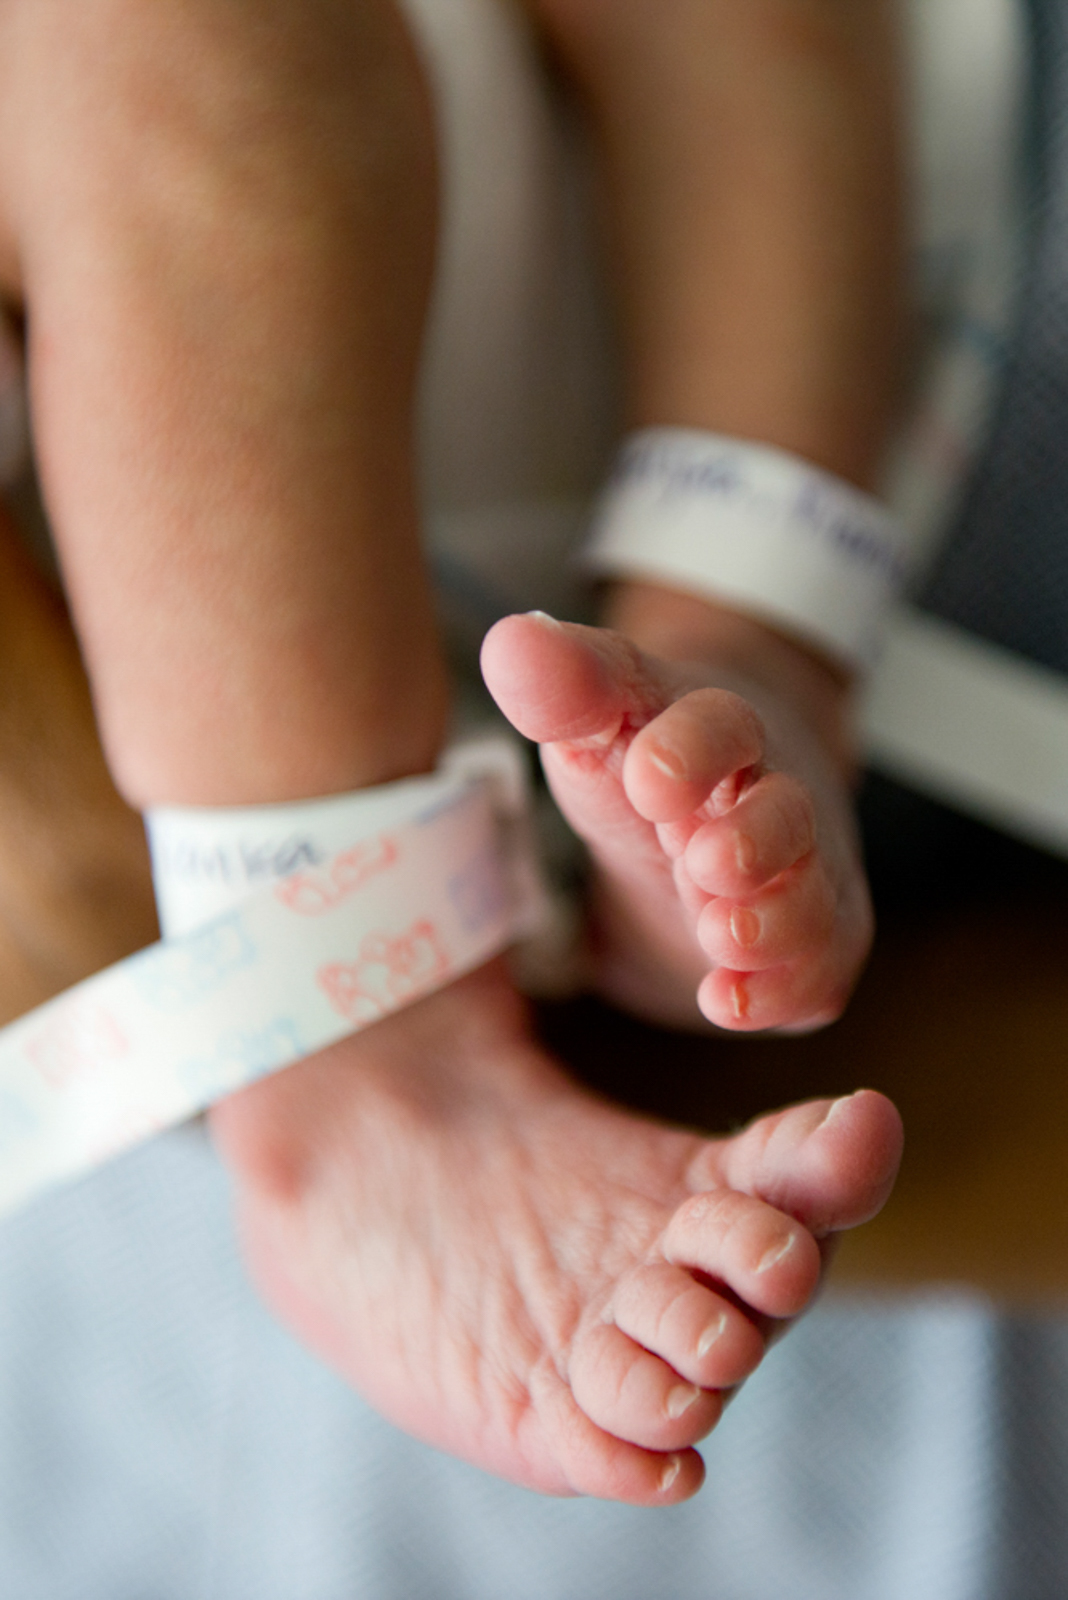 Detail shot of newborn's feet, with tags around ankles